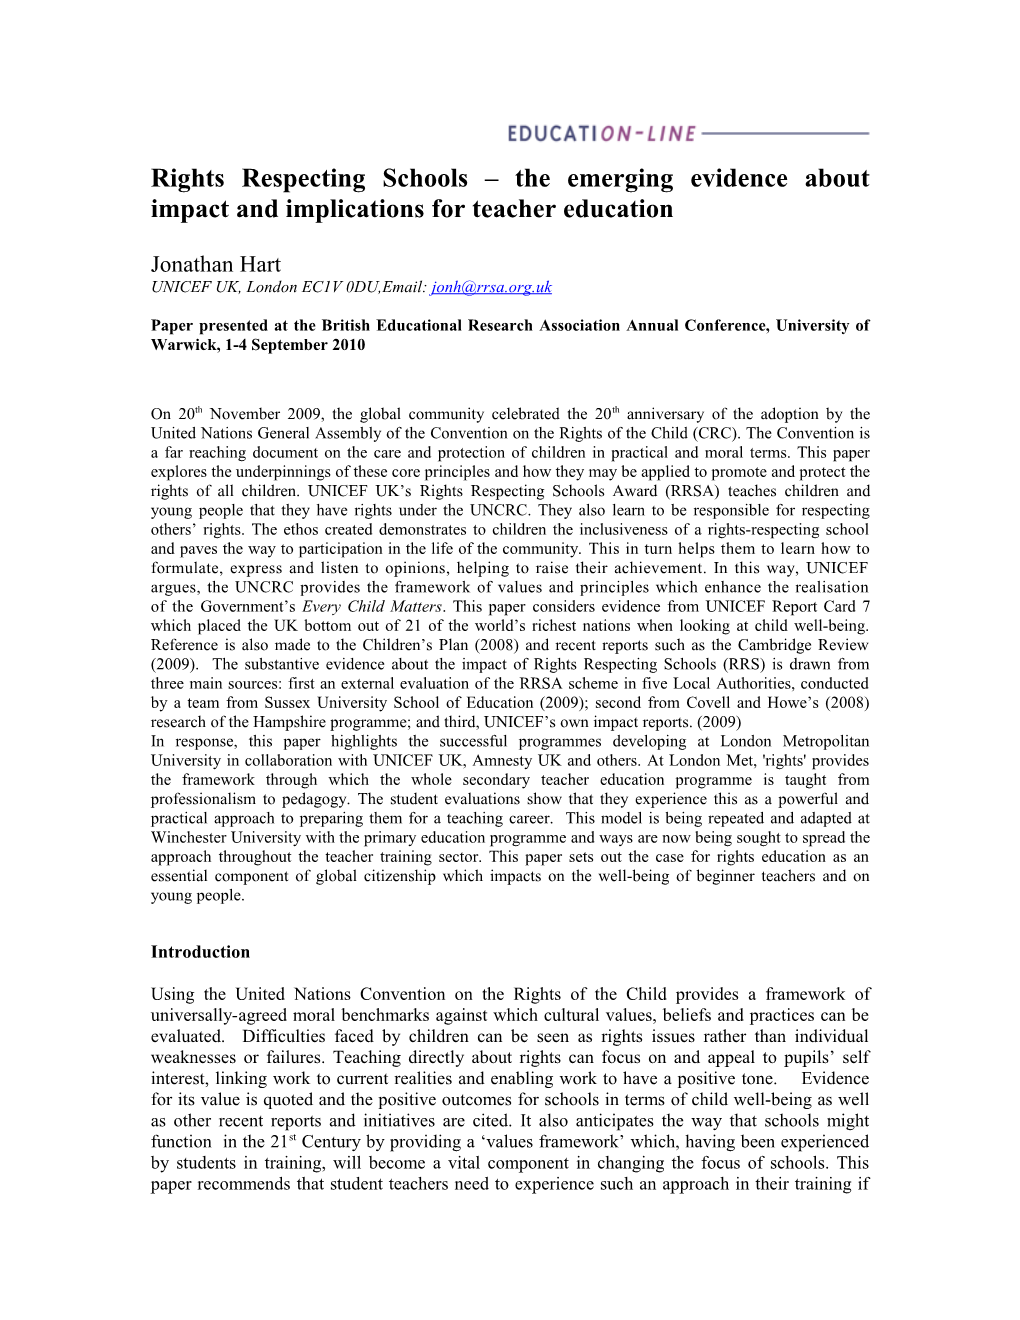 Rights Respecting Schools the Emerging Evidence About Impact and Implications for Teacher